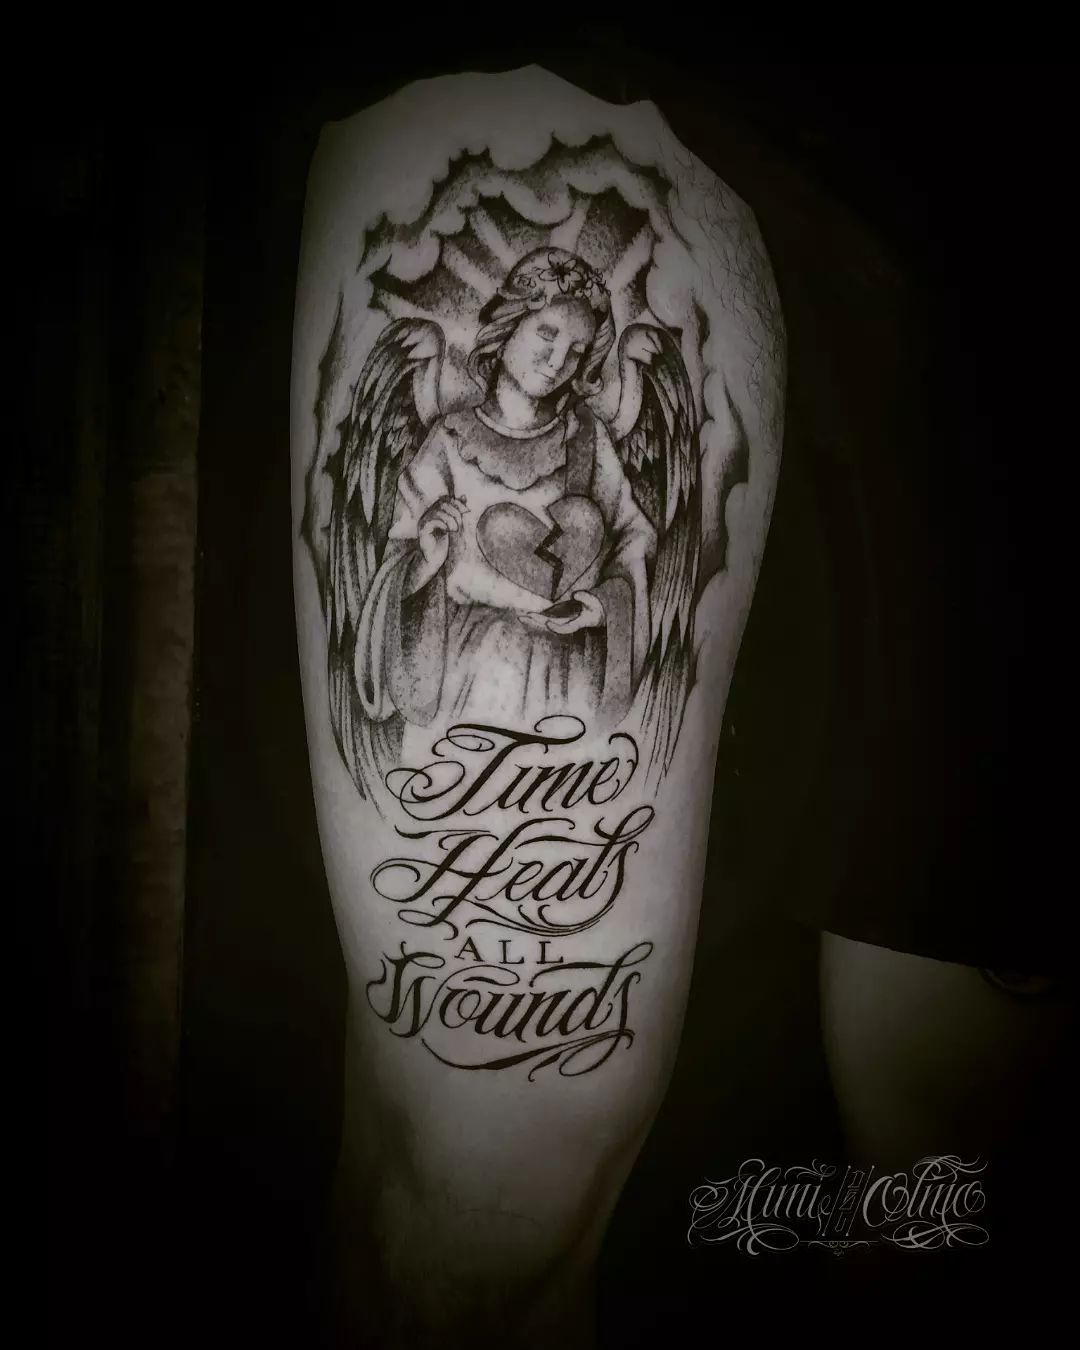 18 Time Heals All Wounds Tattoos To Help You Grieve • Body Artifact